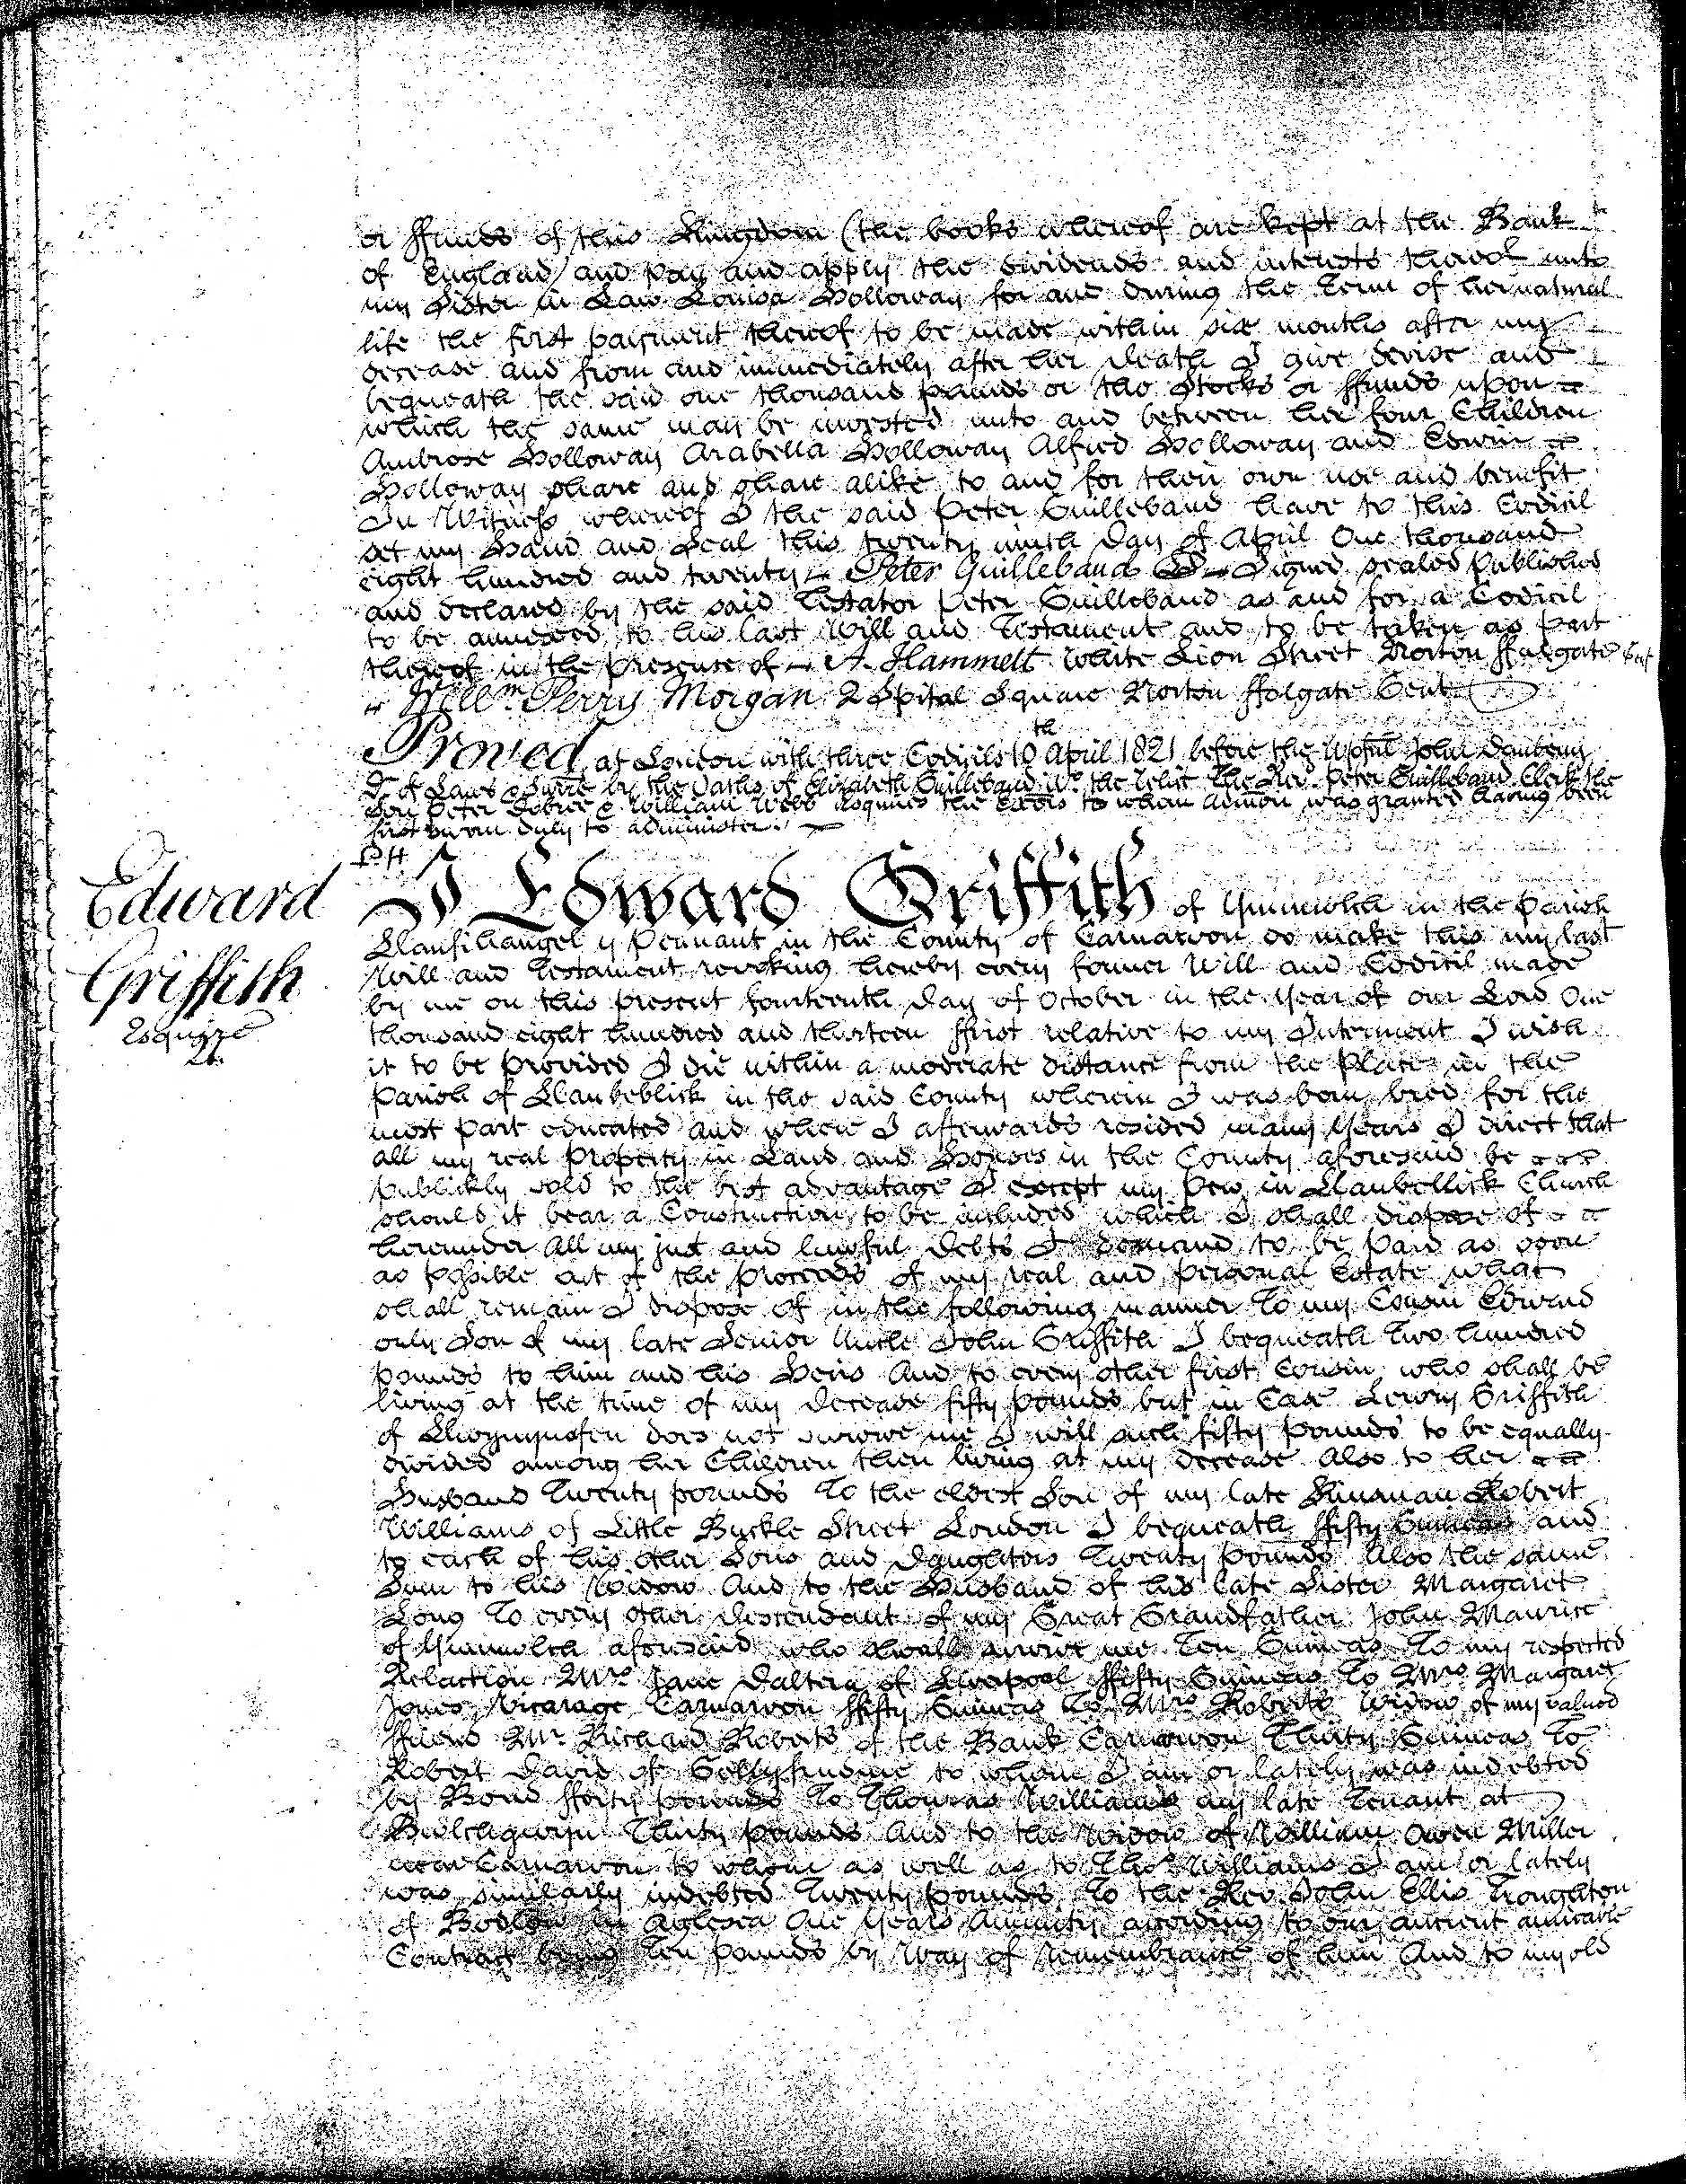 Peter Guillebaud’s will of 1821, page 7